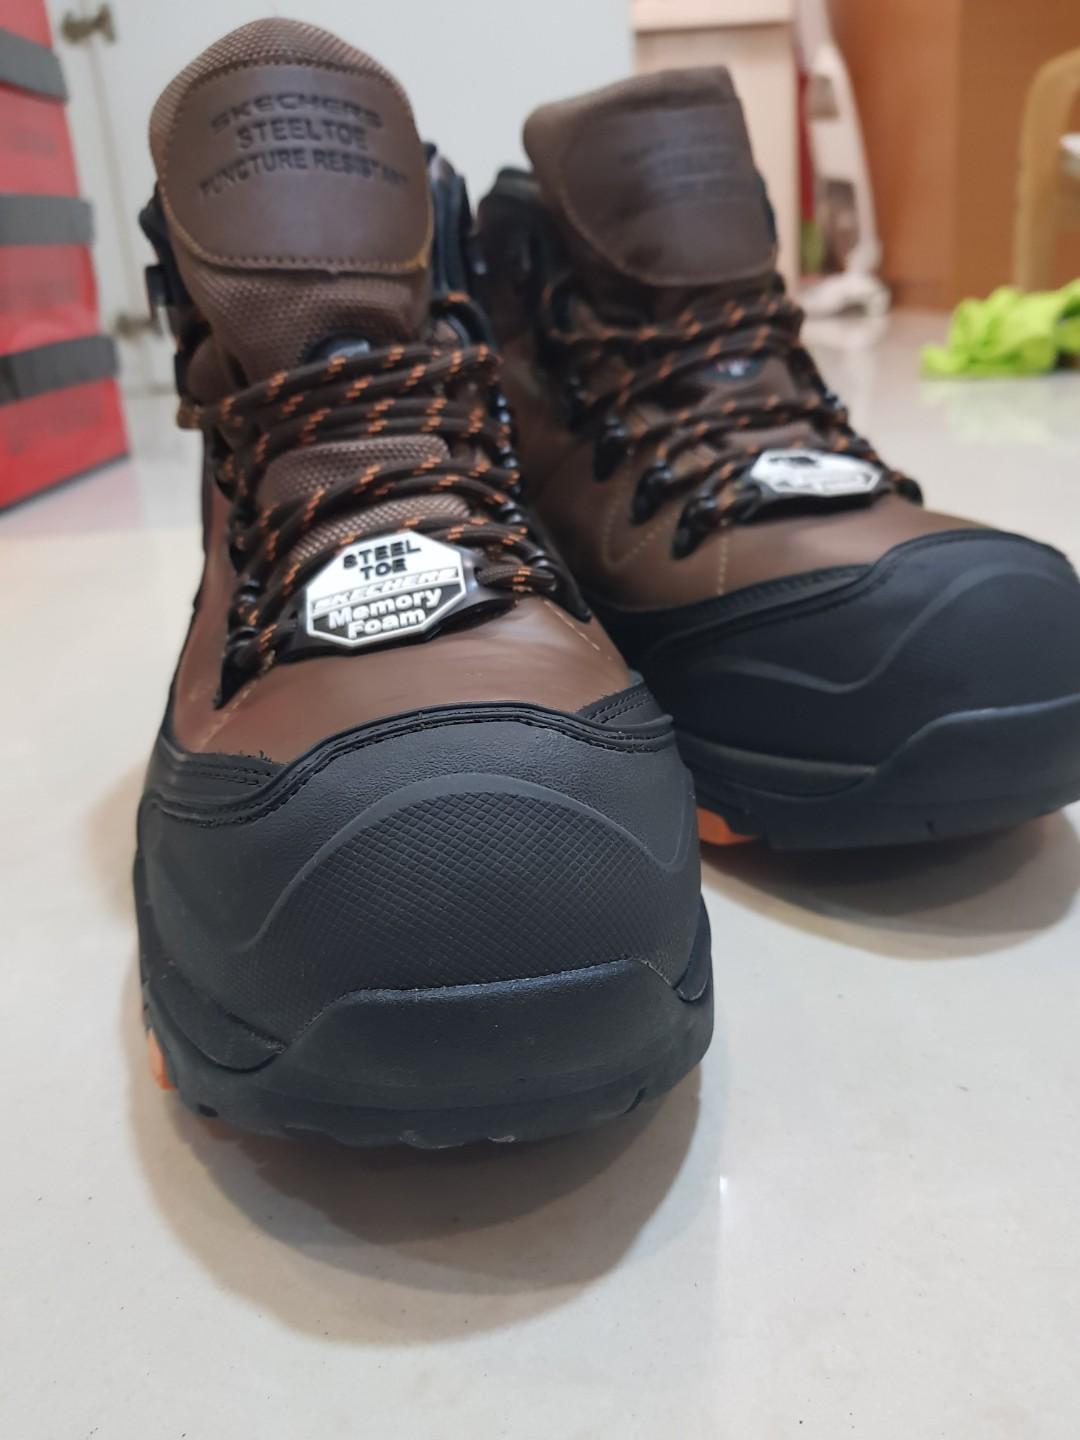 Skechers safety shoes/ steel toe (discounted to $80), Men's Fashion ...